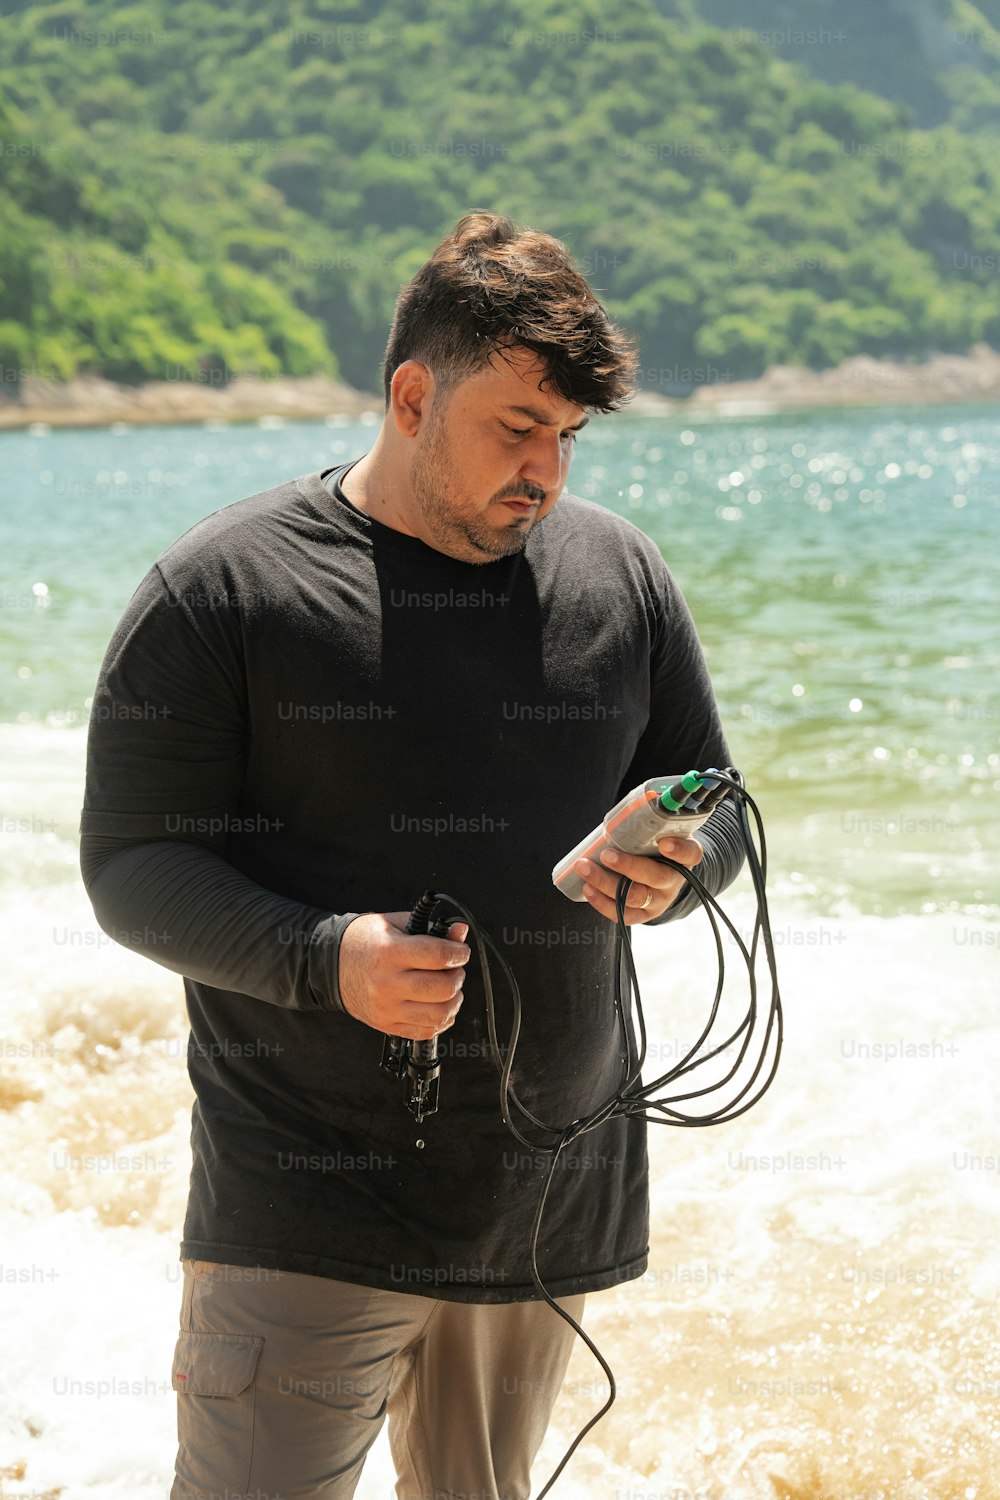 a man standing on a beach holding a cell phone